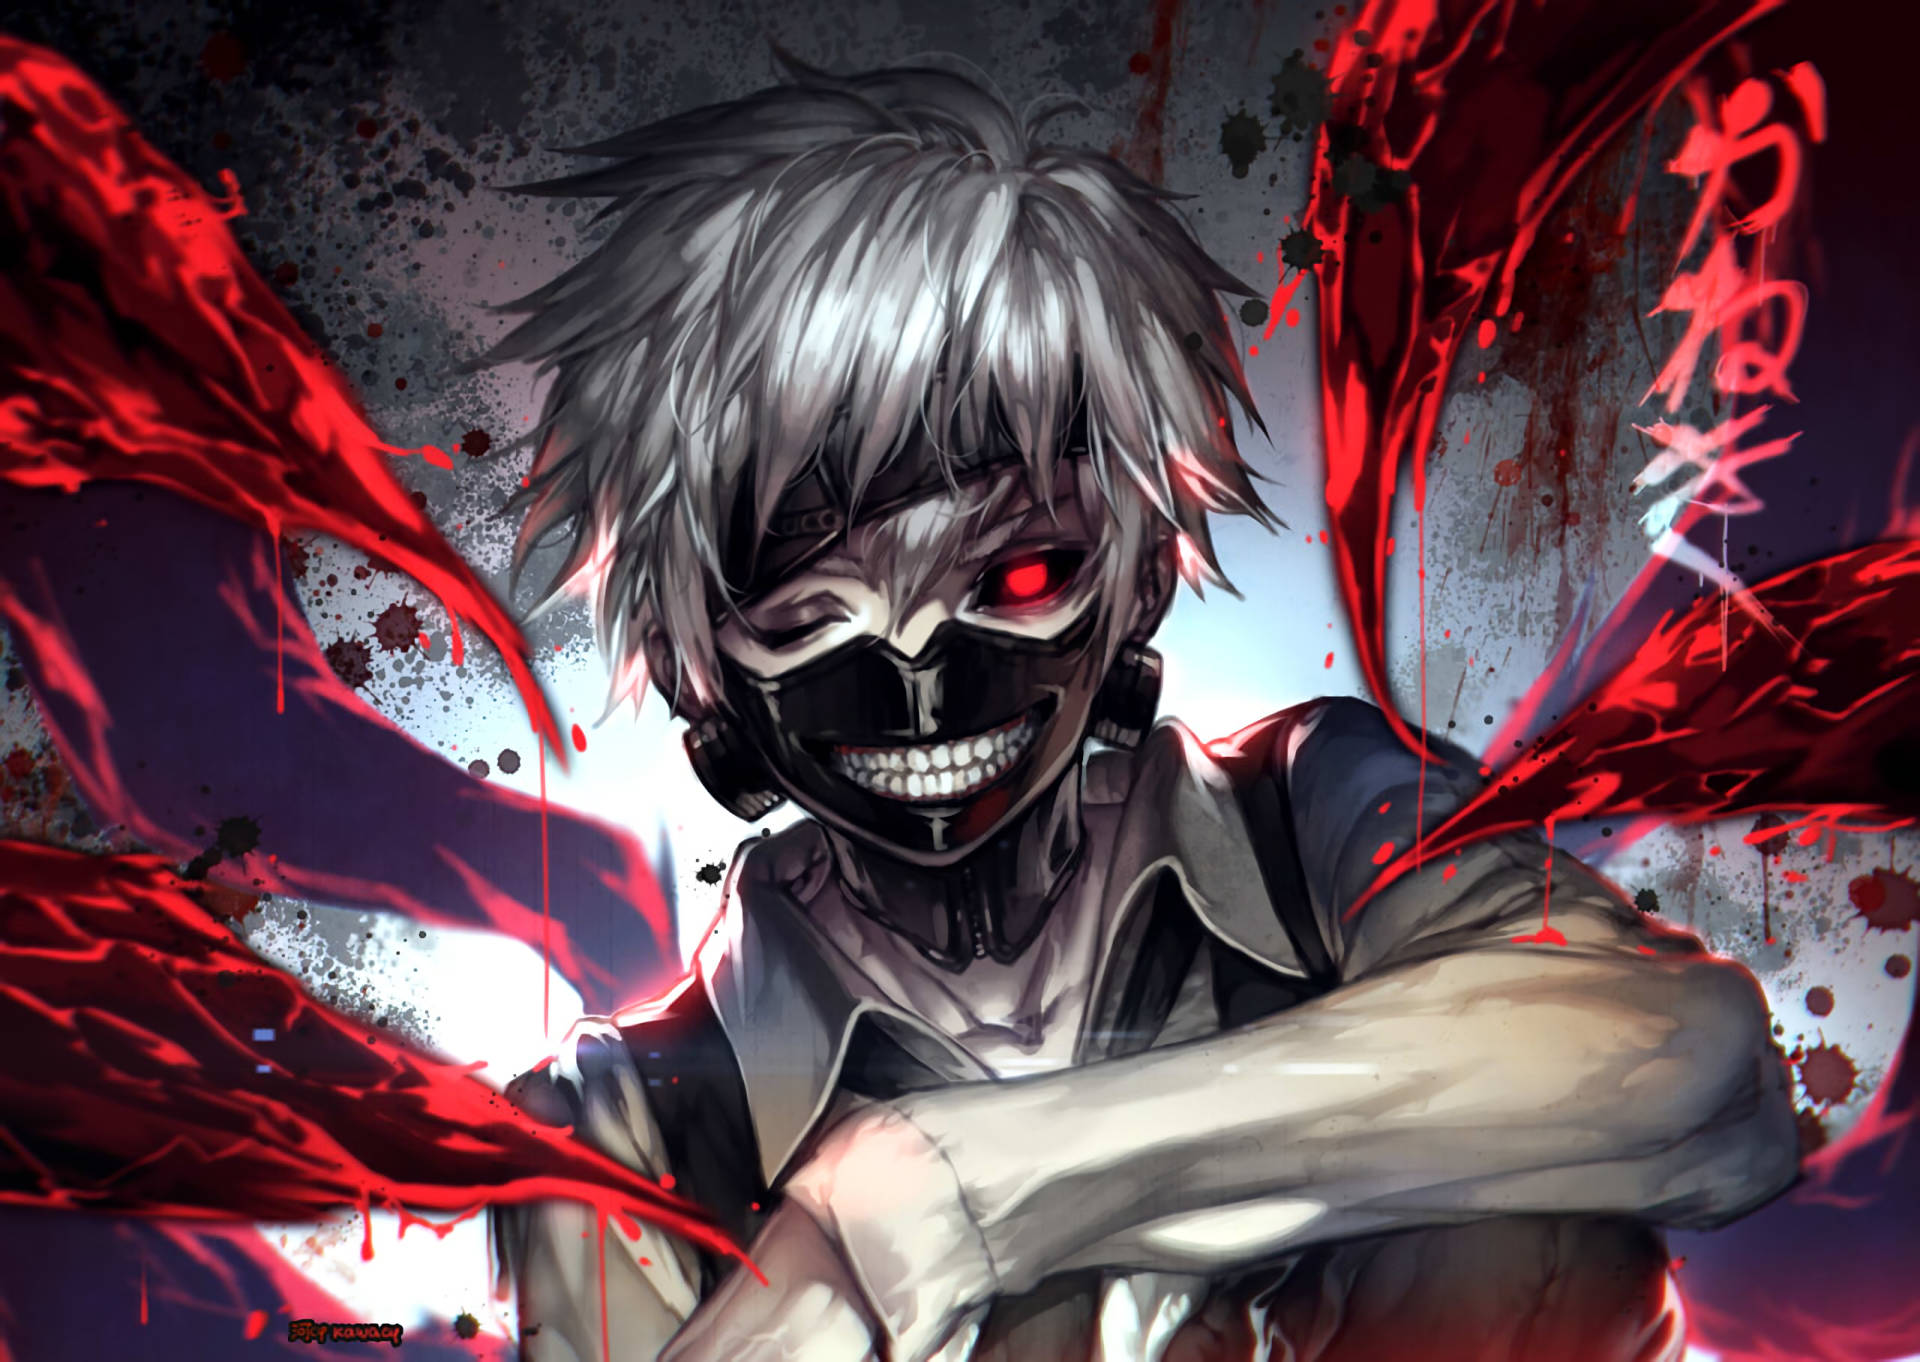 Tokyo Ghoul Aesthetic With Ken Controlling Blood Wallpaper